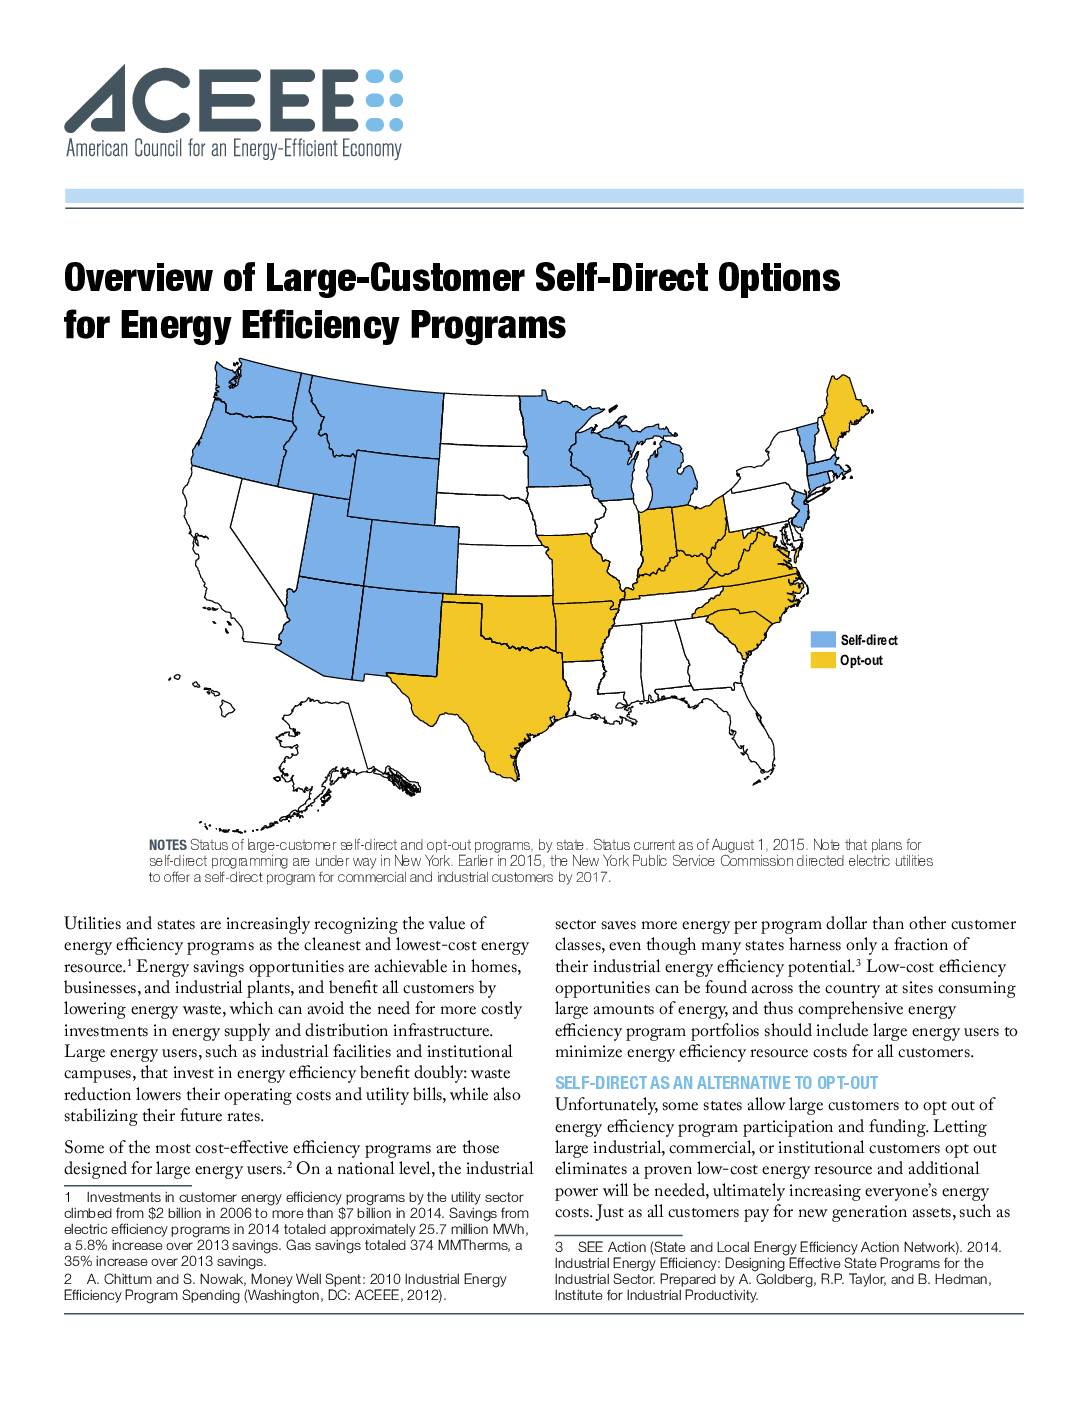 Overview of Large-Customer Self-Direct Options for Energy Efficiency Programs